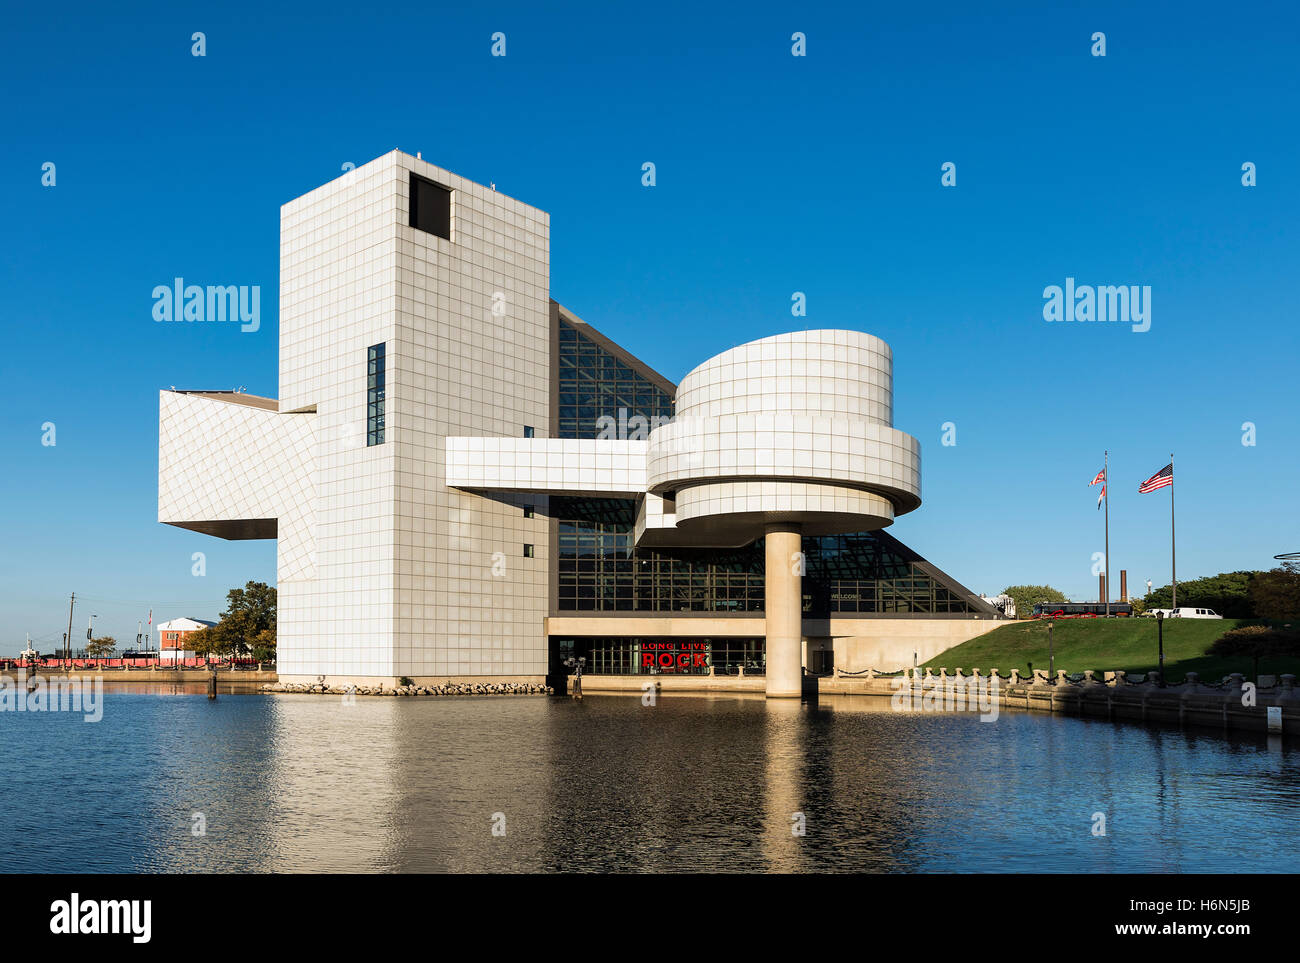 Rock And Roll Hall Of Fame, Cleveland, Ohio, USA. Stockfoto